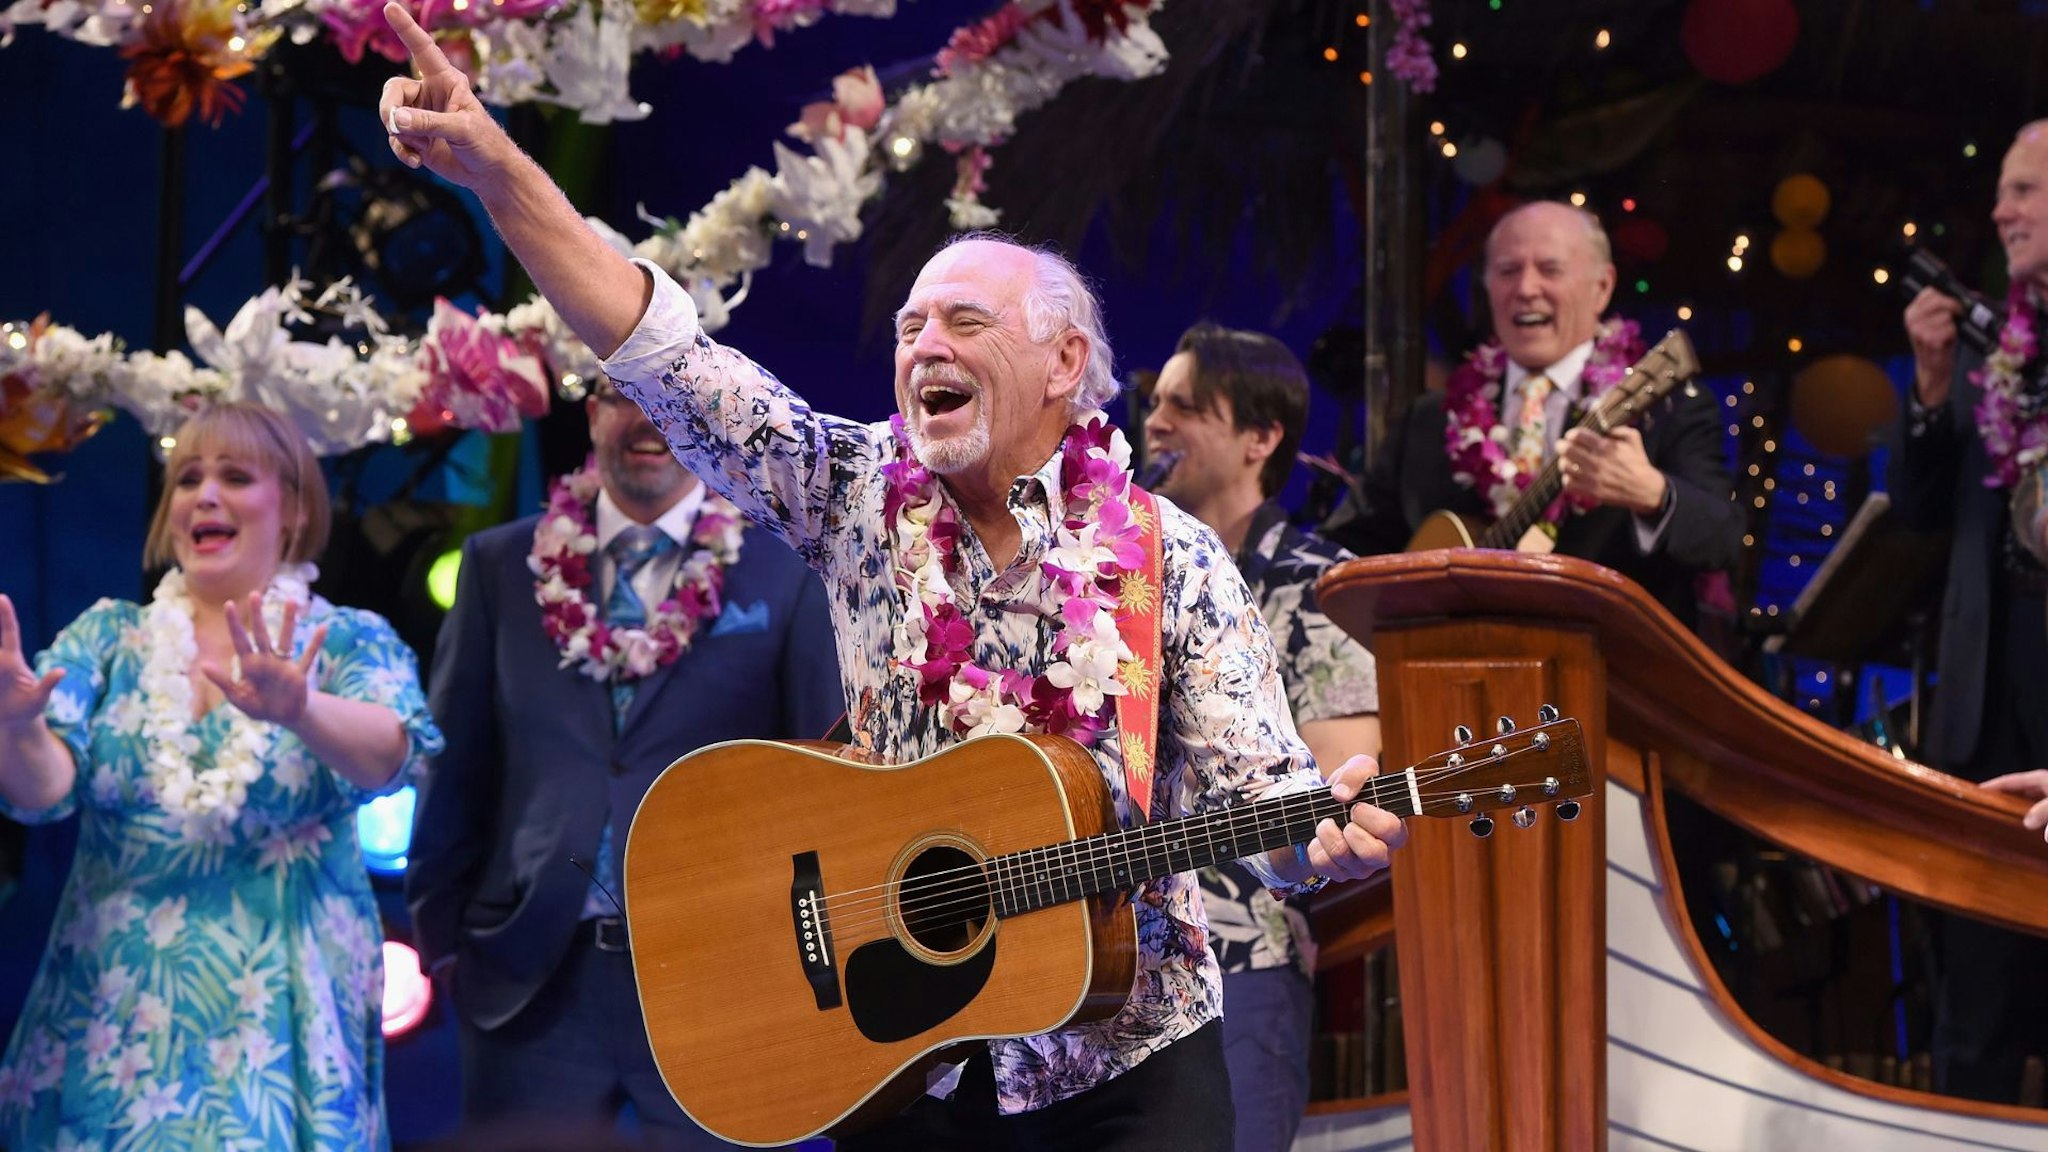 NEW YORK, NY - MARCH 15: Jimmy Buffett (C) takes opening night bow during the Broadway premiere of "Escape to Margaritaville" the new musical featuring songs by Jimmy Buffett at the Marquis Theatre on March 15, 2018 in New York City. (